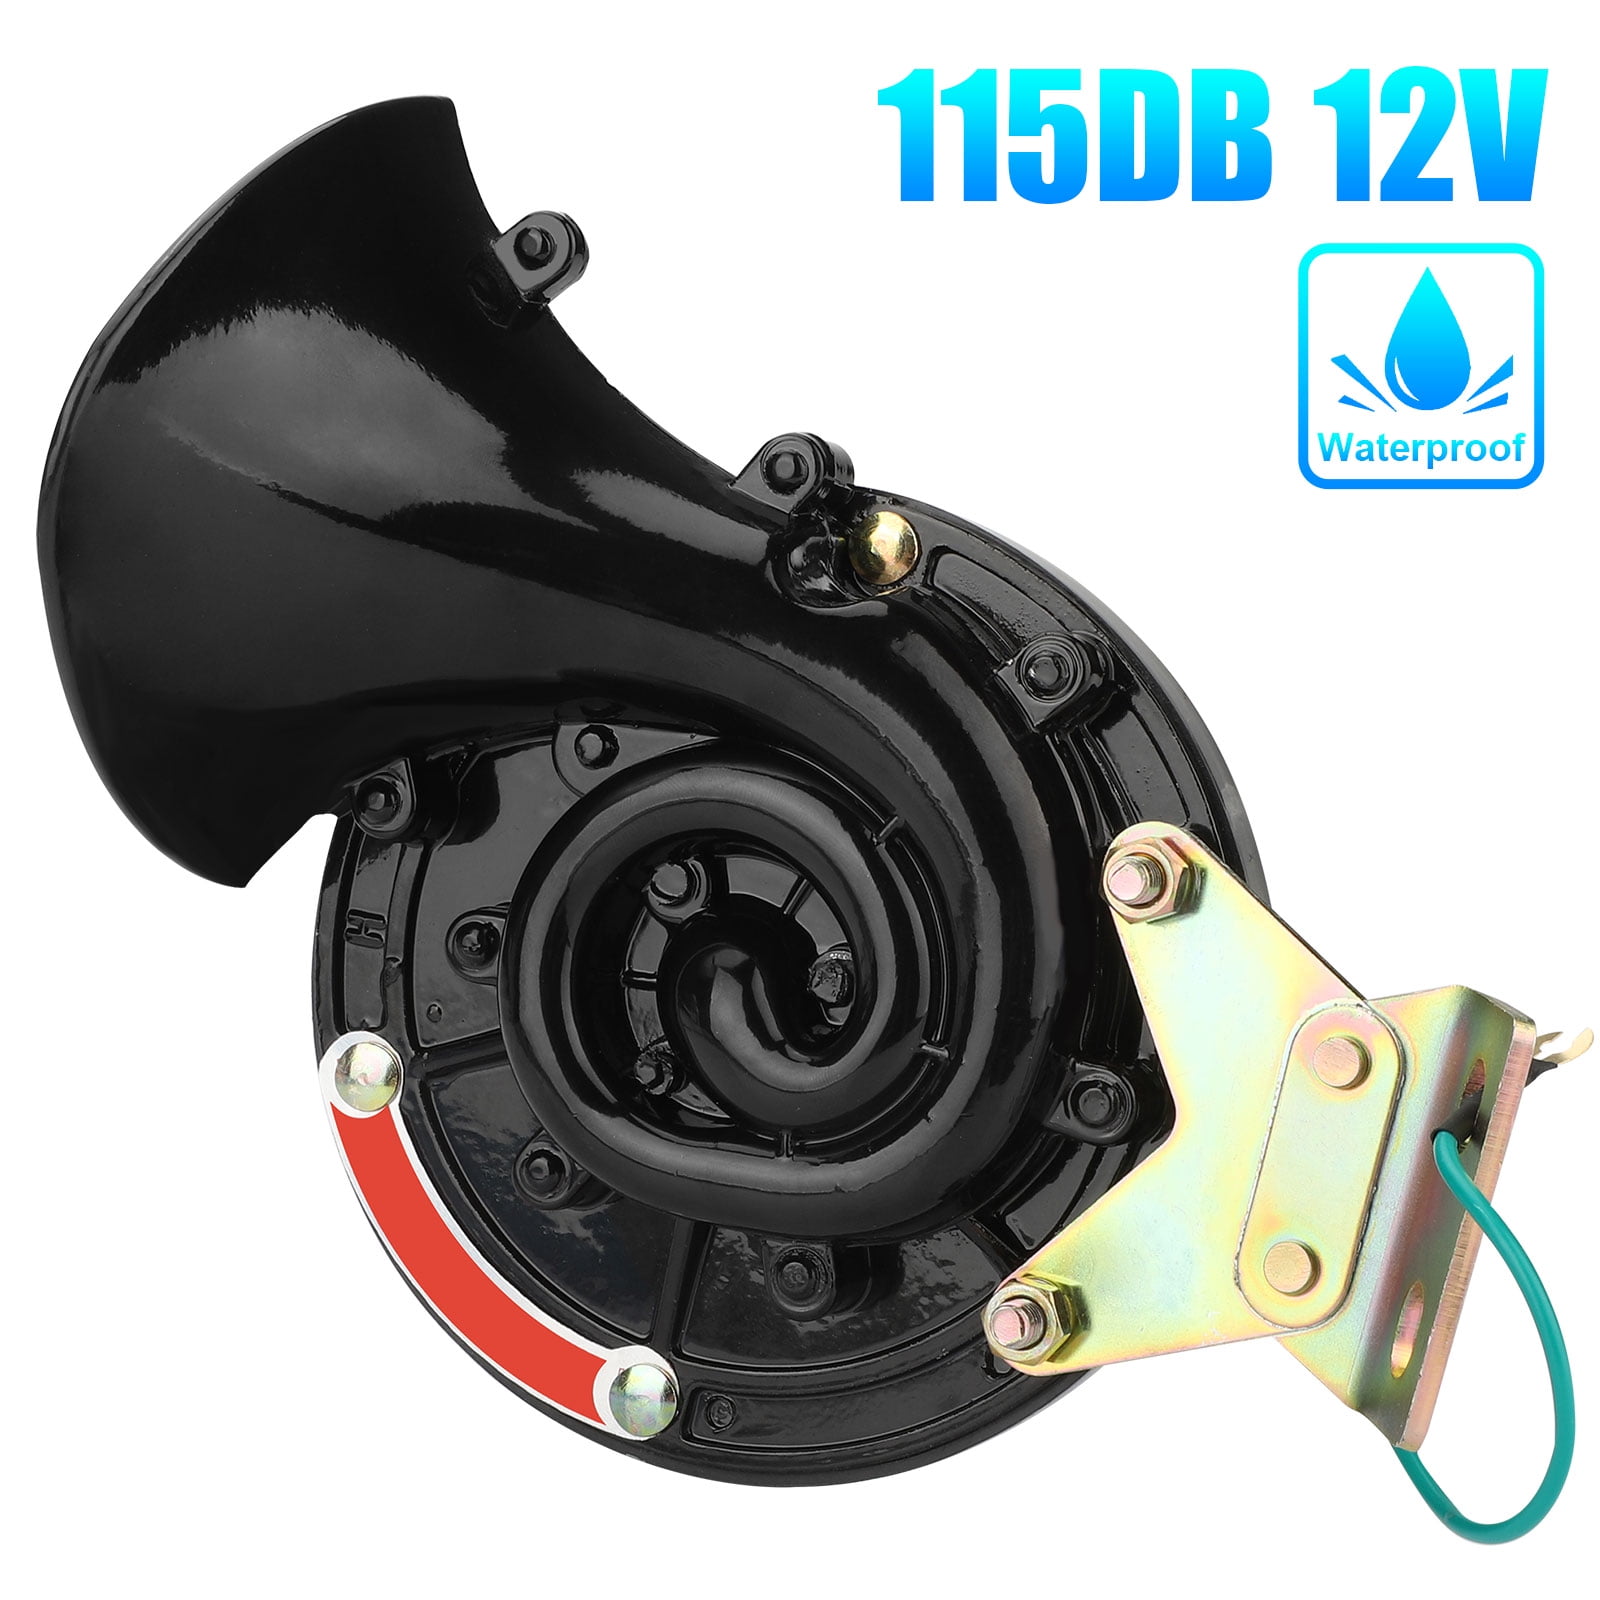 300DB 12V Cars Motorcycle Boat Super Loud Electric Snail Air Horn Trombe  Bull Horn Lufthorn Hupe